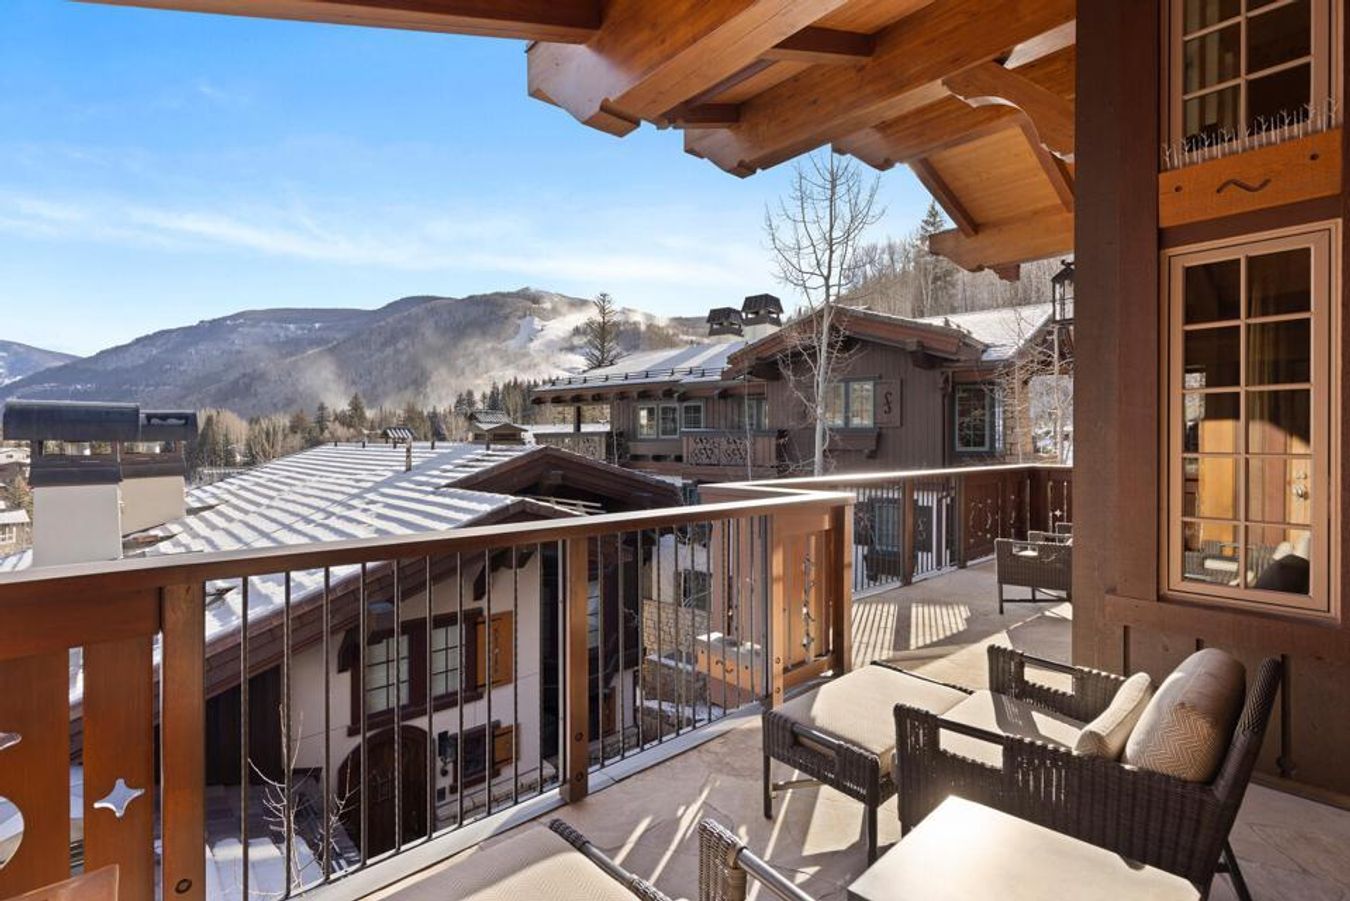 Colorado is calling : $17-Million Ski Retreat is the perfect place to land after lockdown.